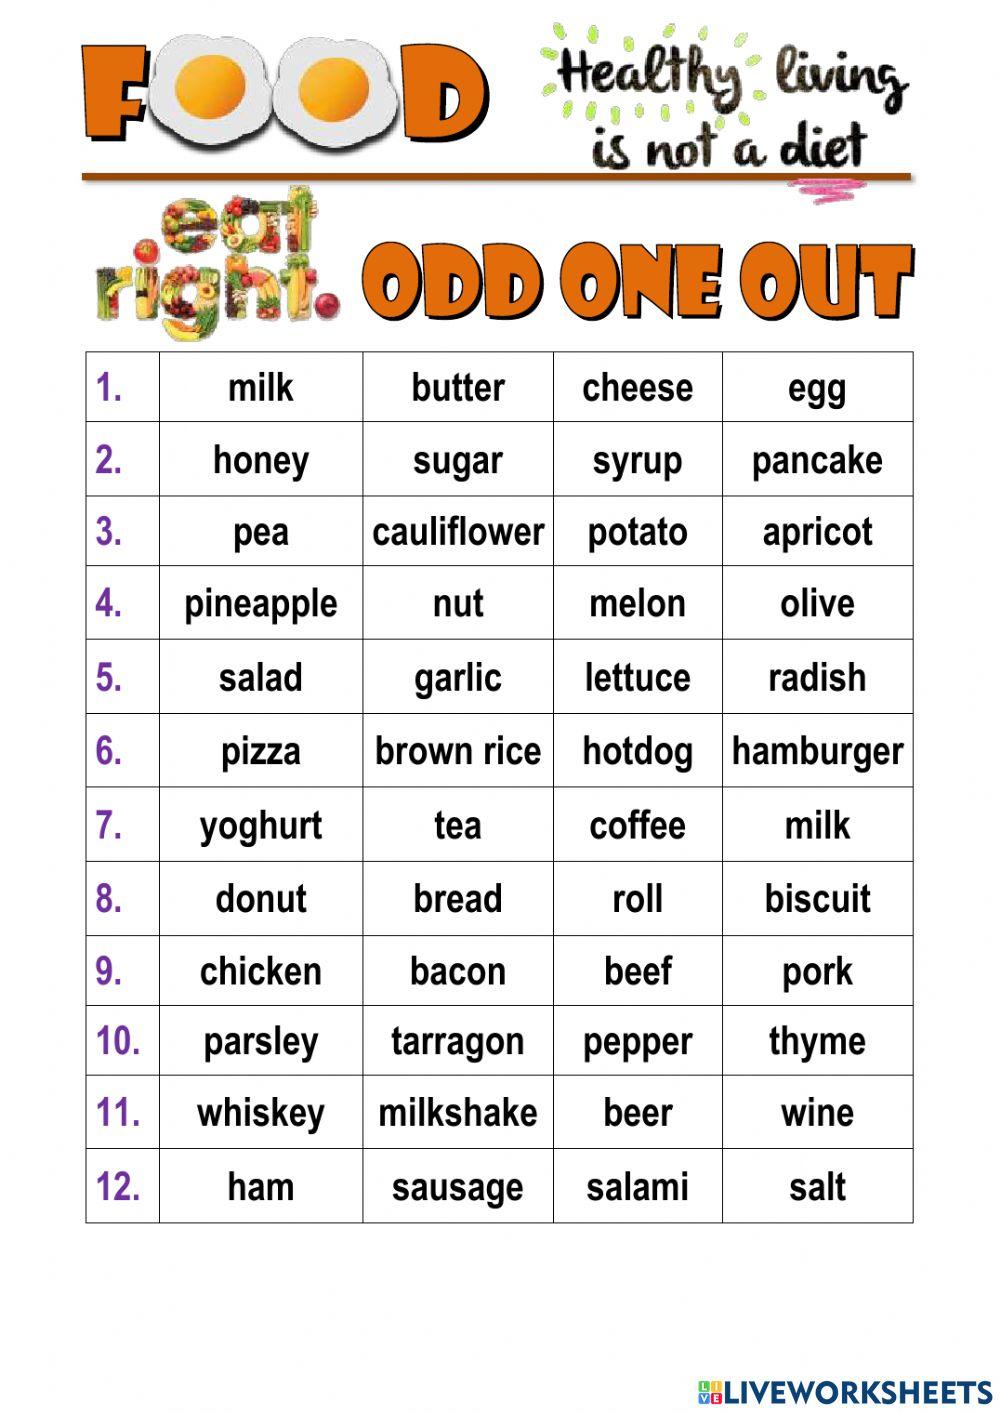 Food - Odd One Out